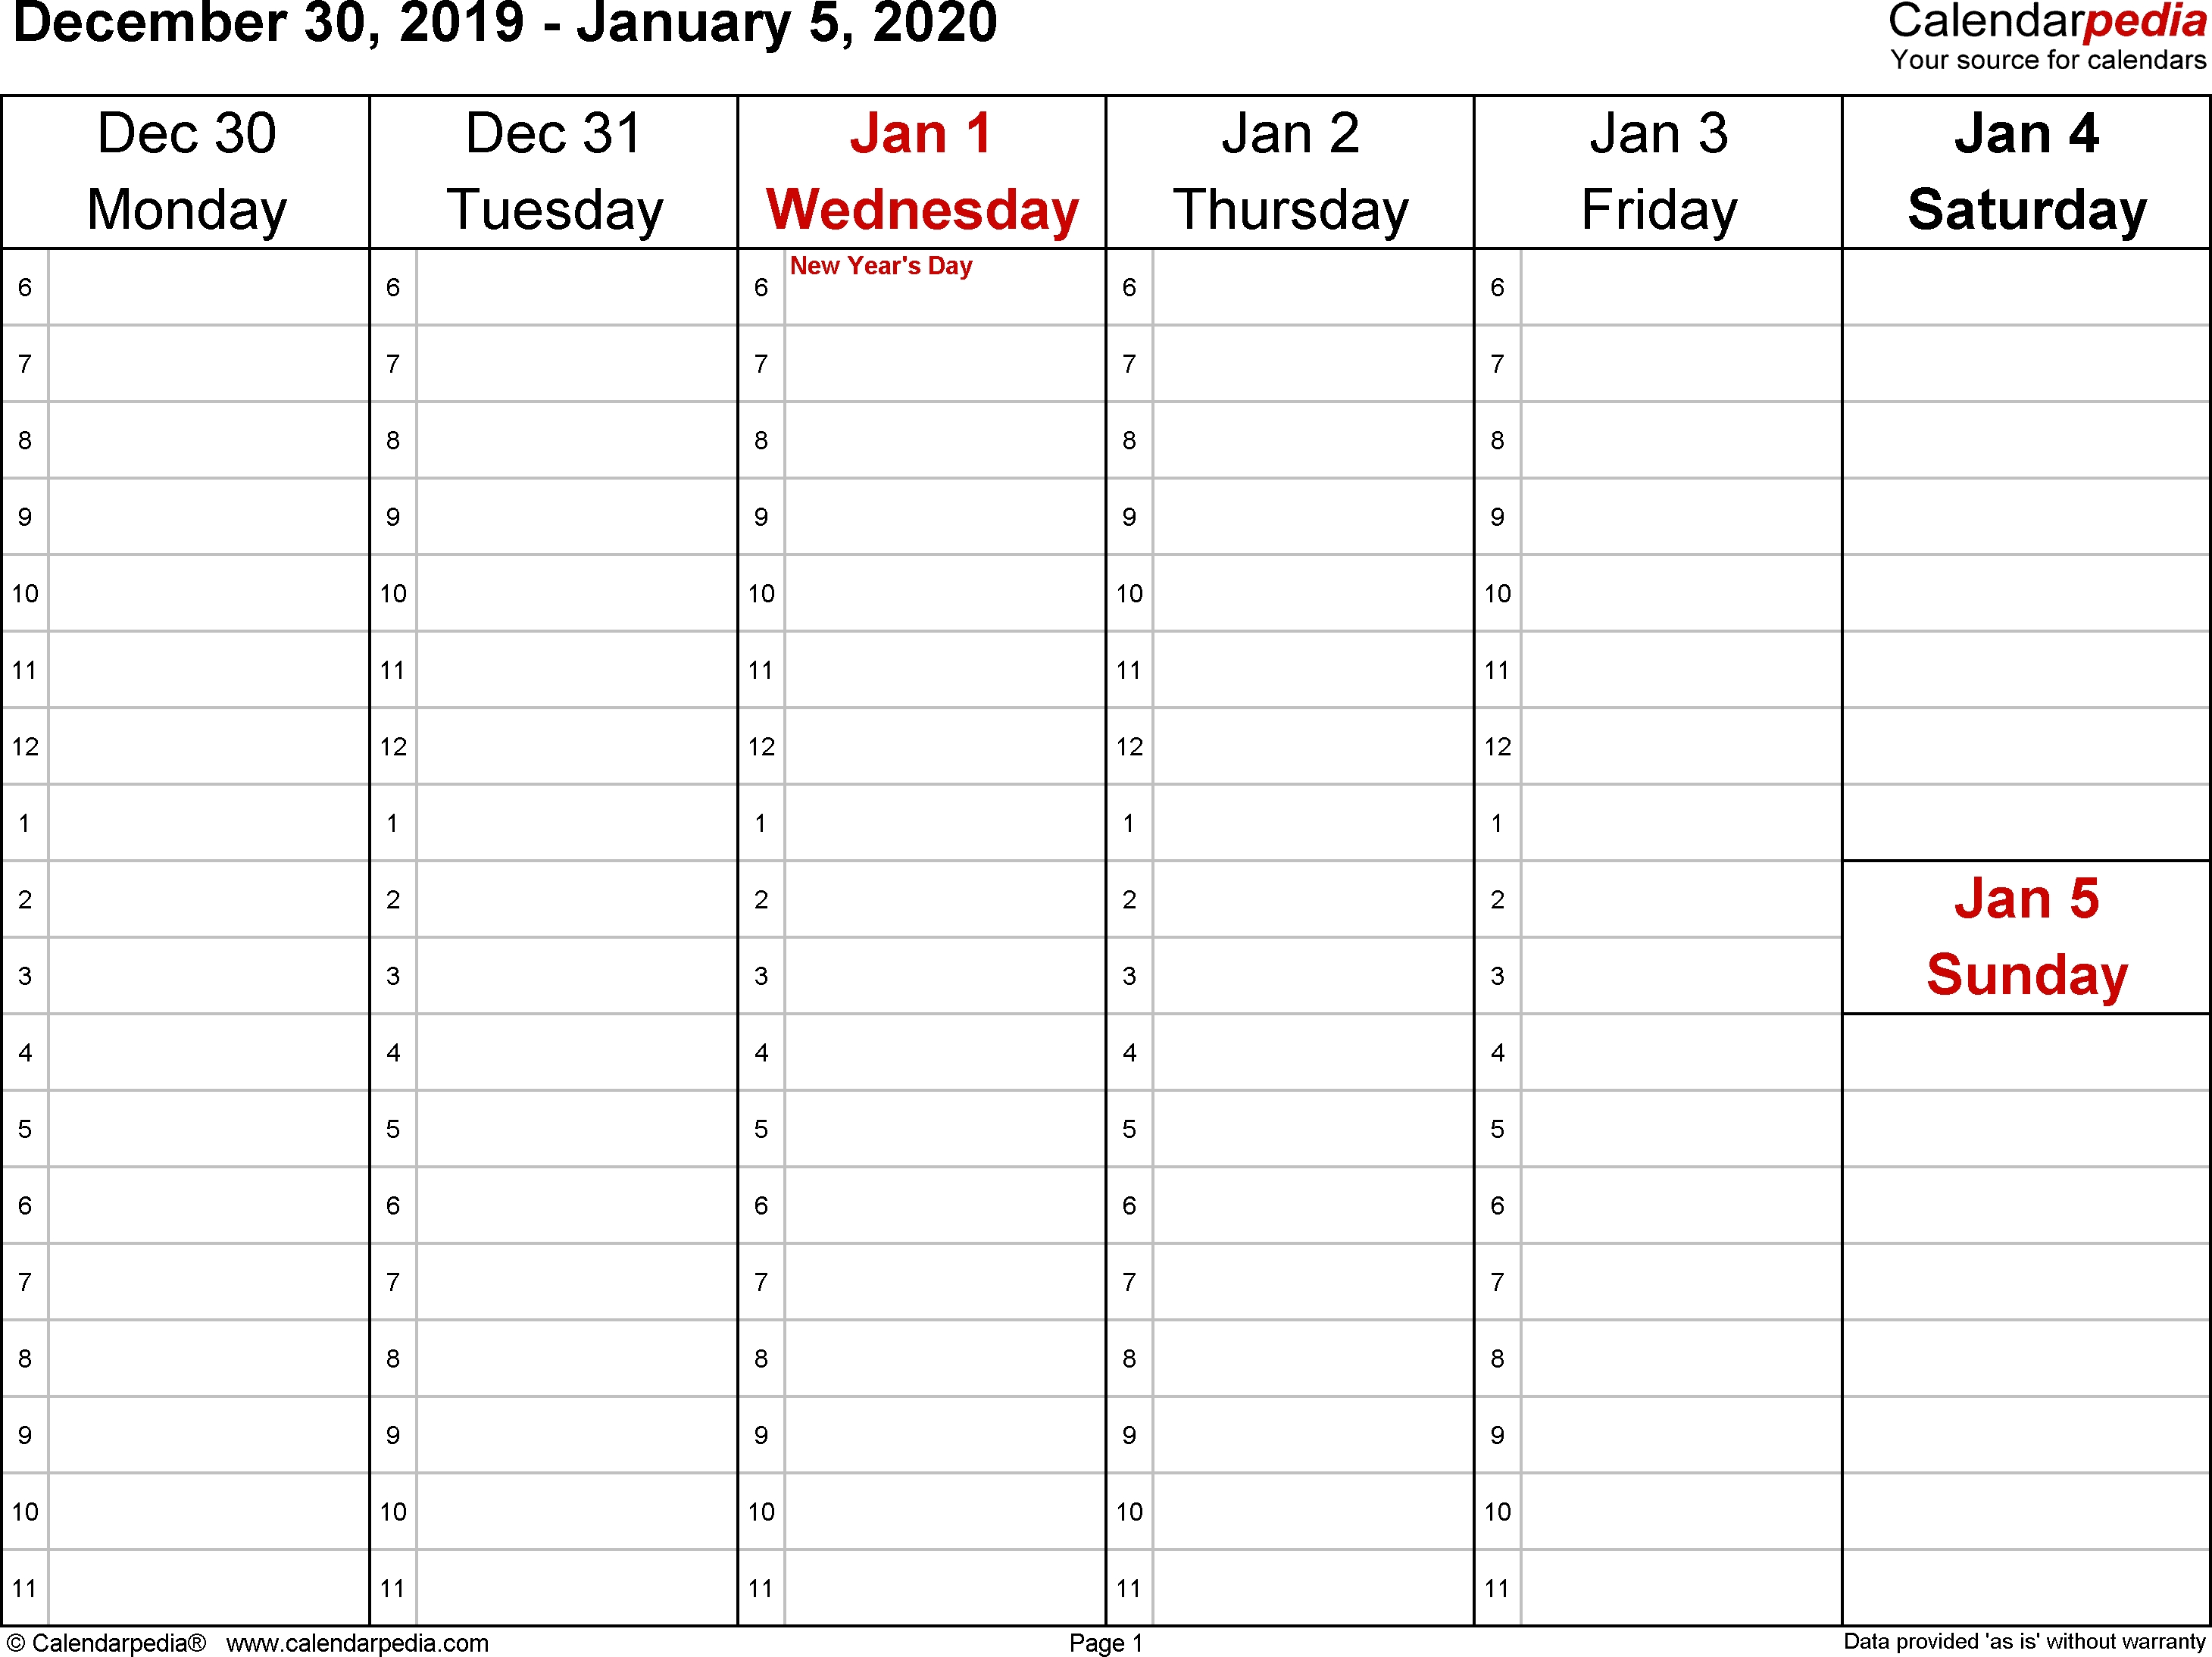 Weekly Calendar 2020 For Word - 12 Free Printable Templates-Monday To Friday Planner Templates 2020